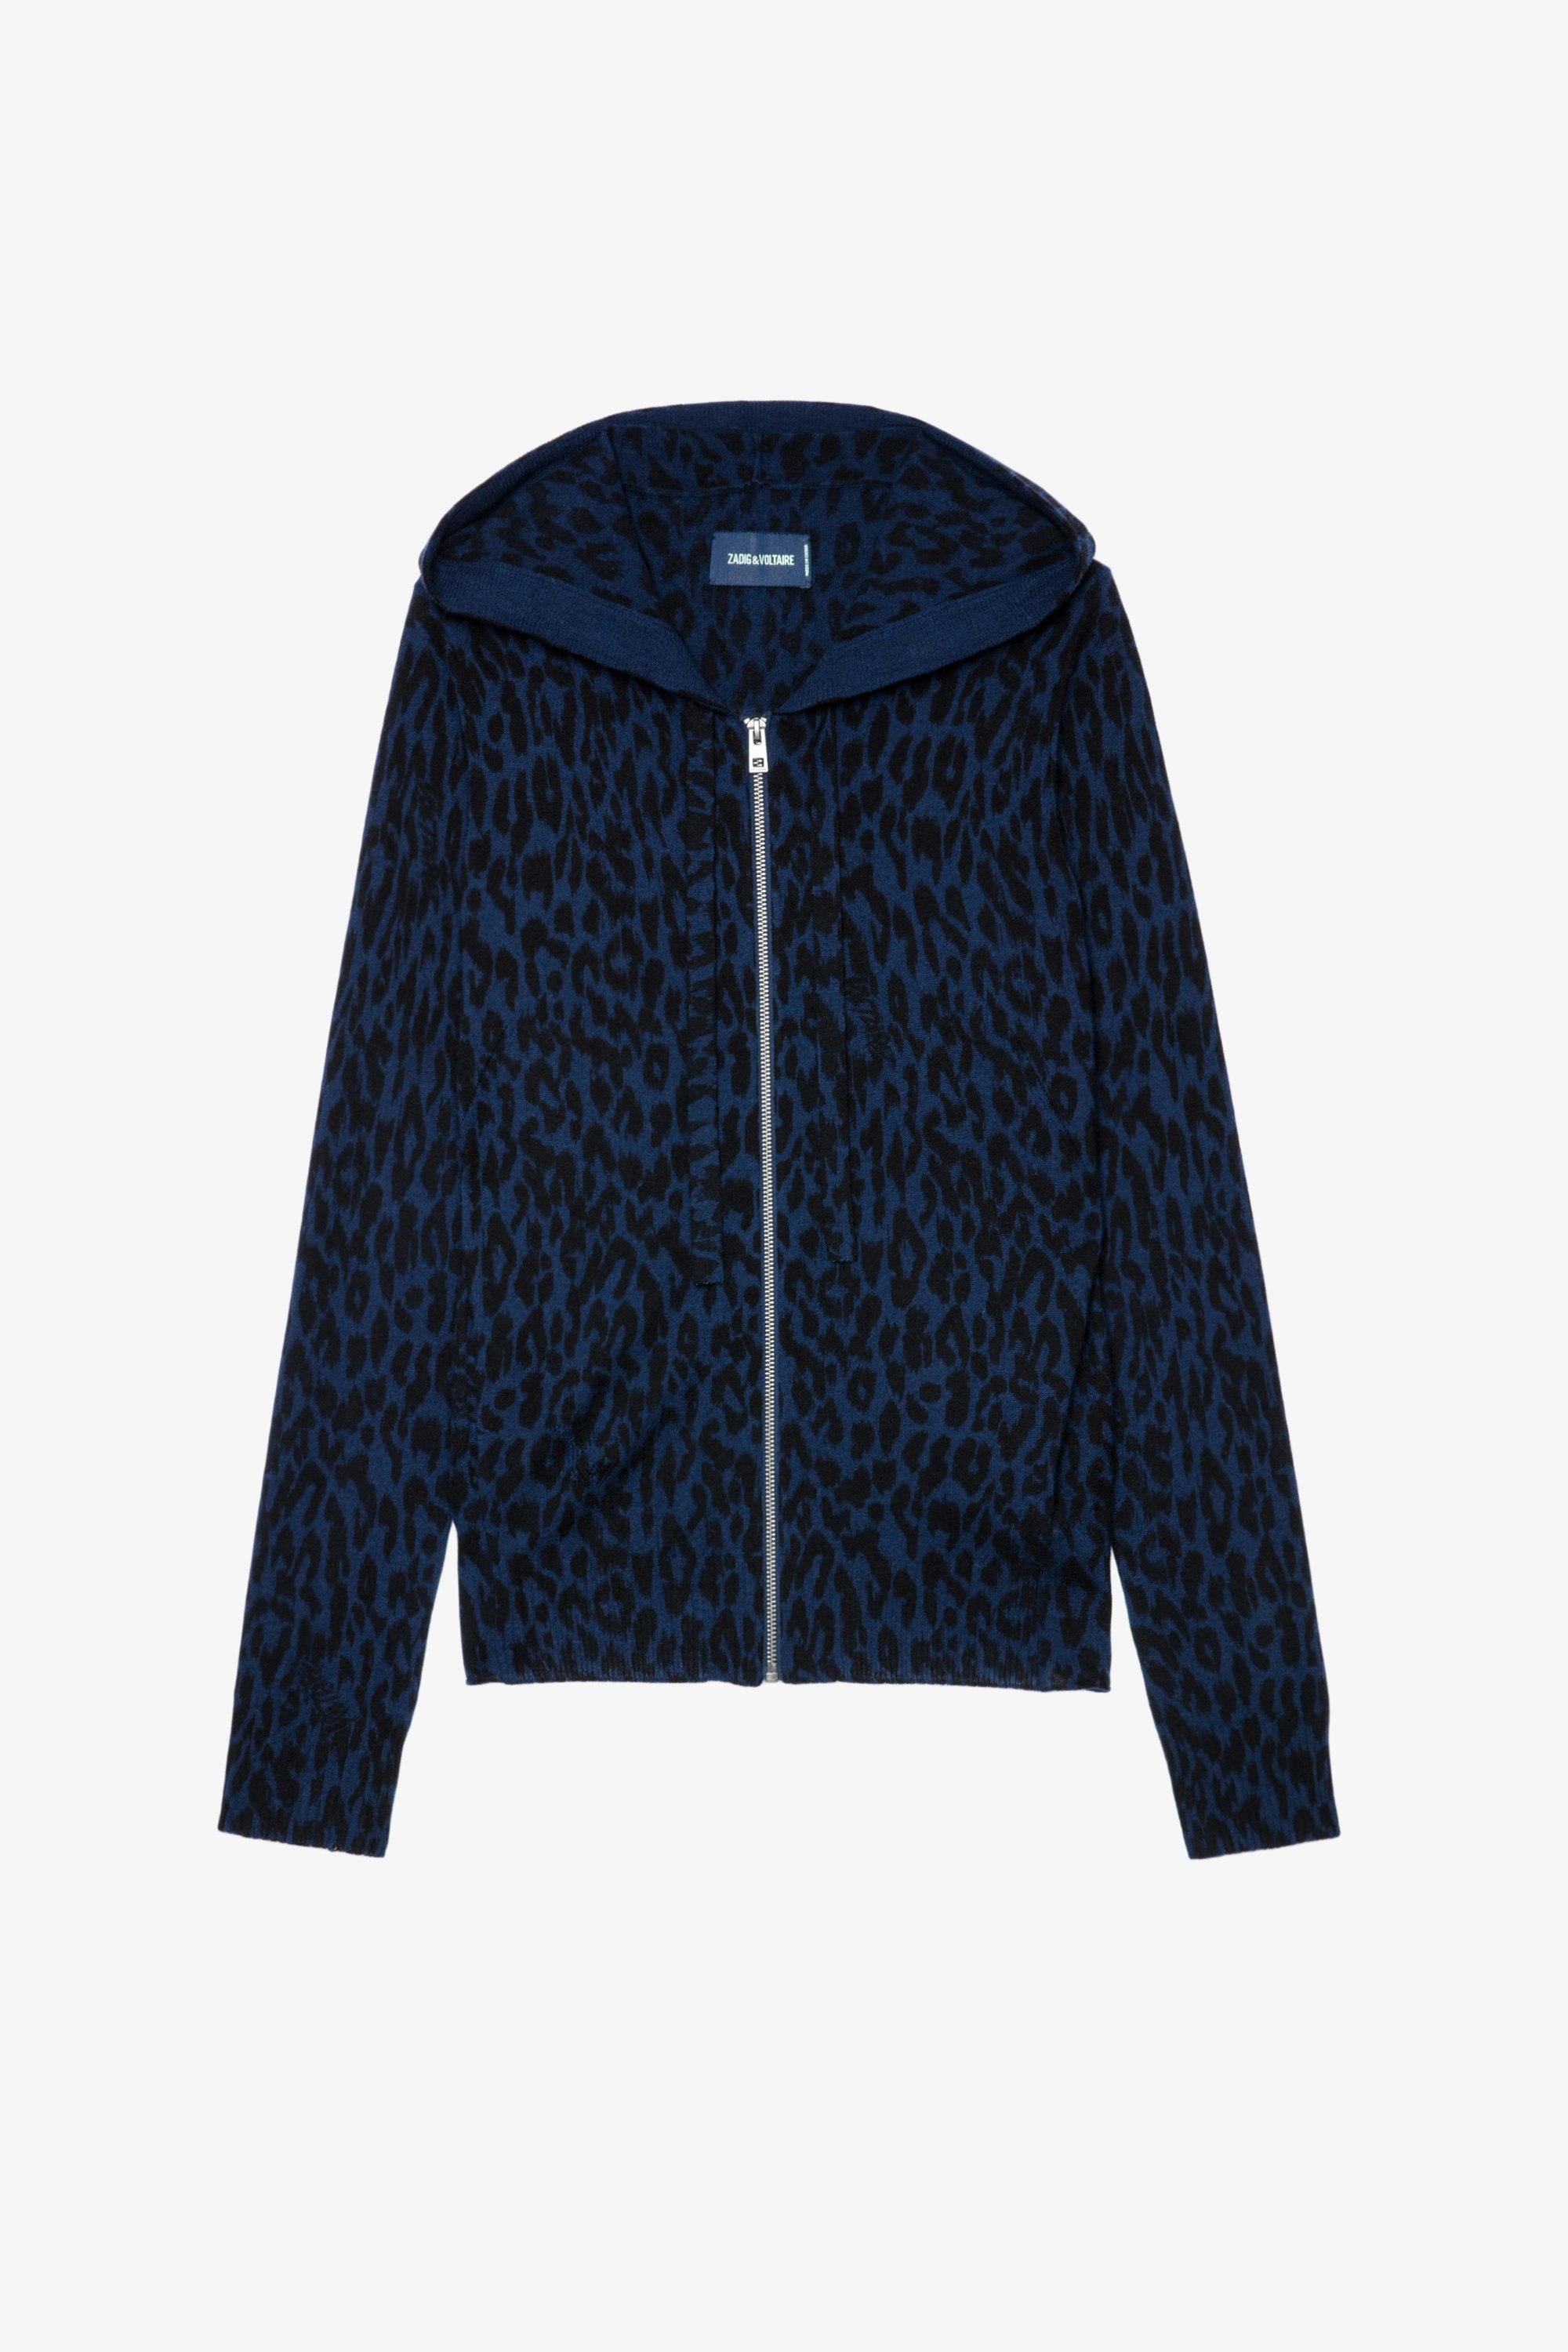 Cassy カシミヤカーディガン Women’s hooded cardigan in navy blue feather cashmere with a leopard-print motif